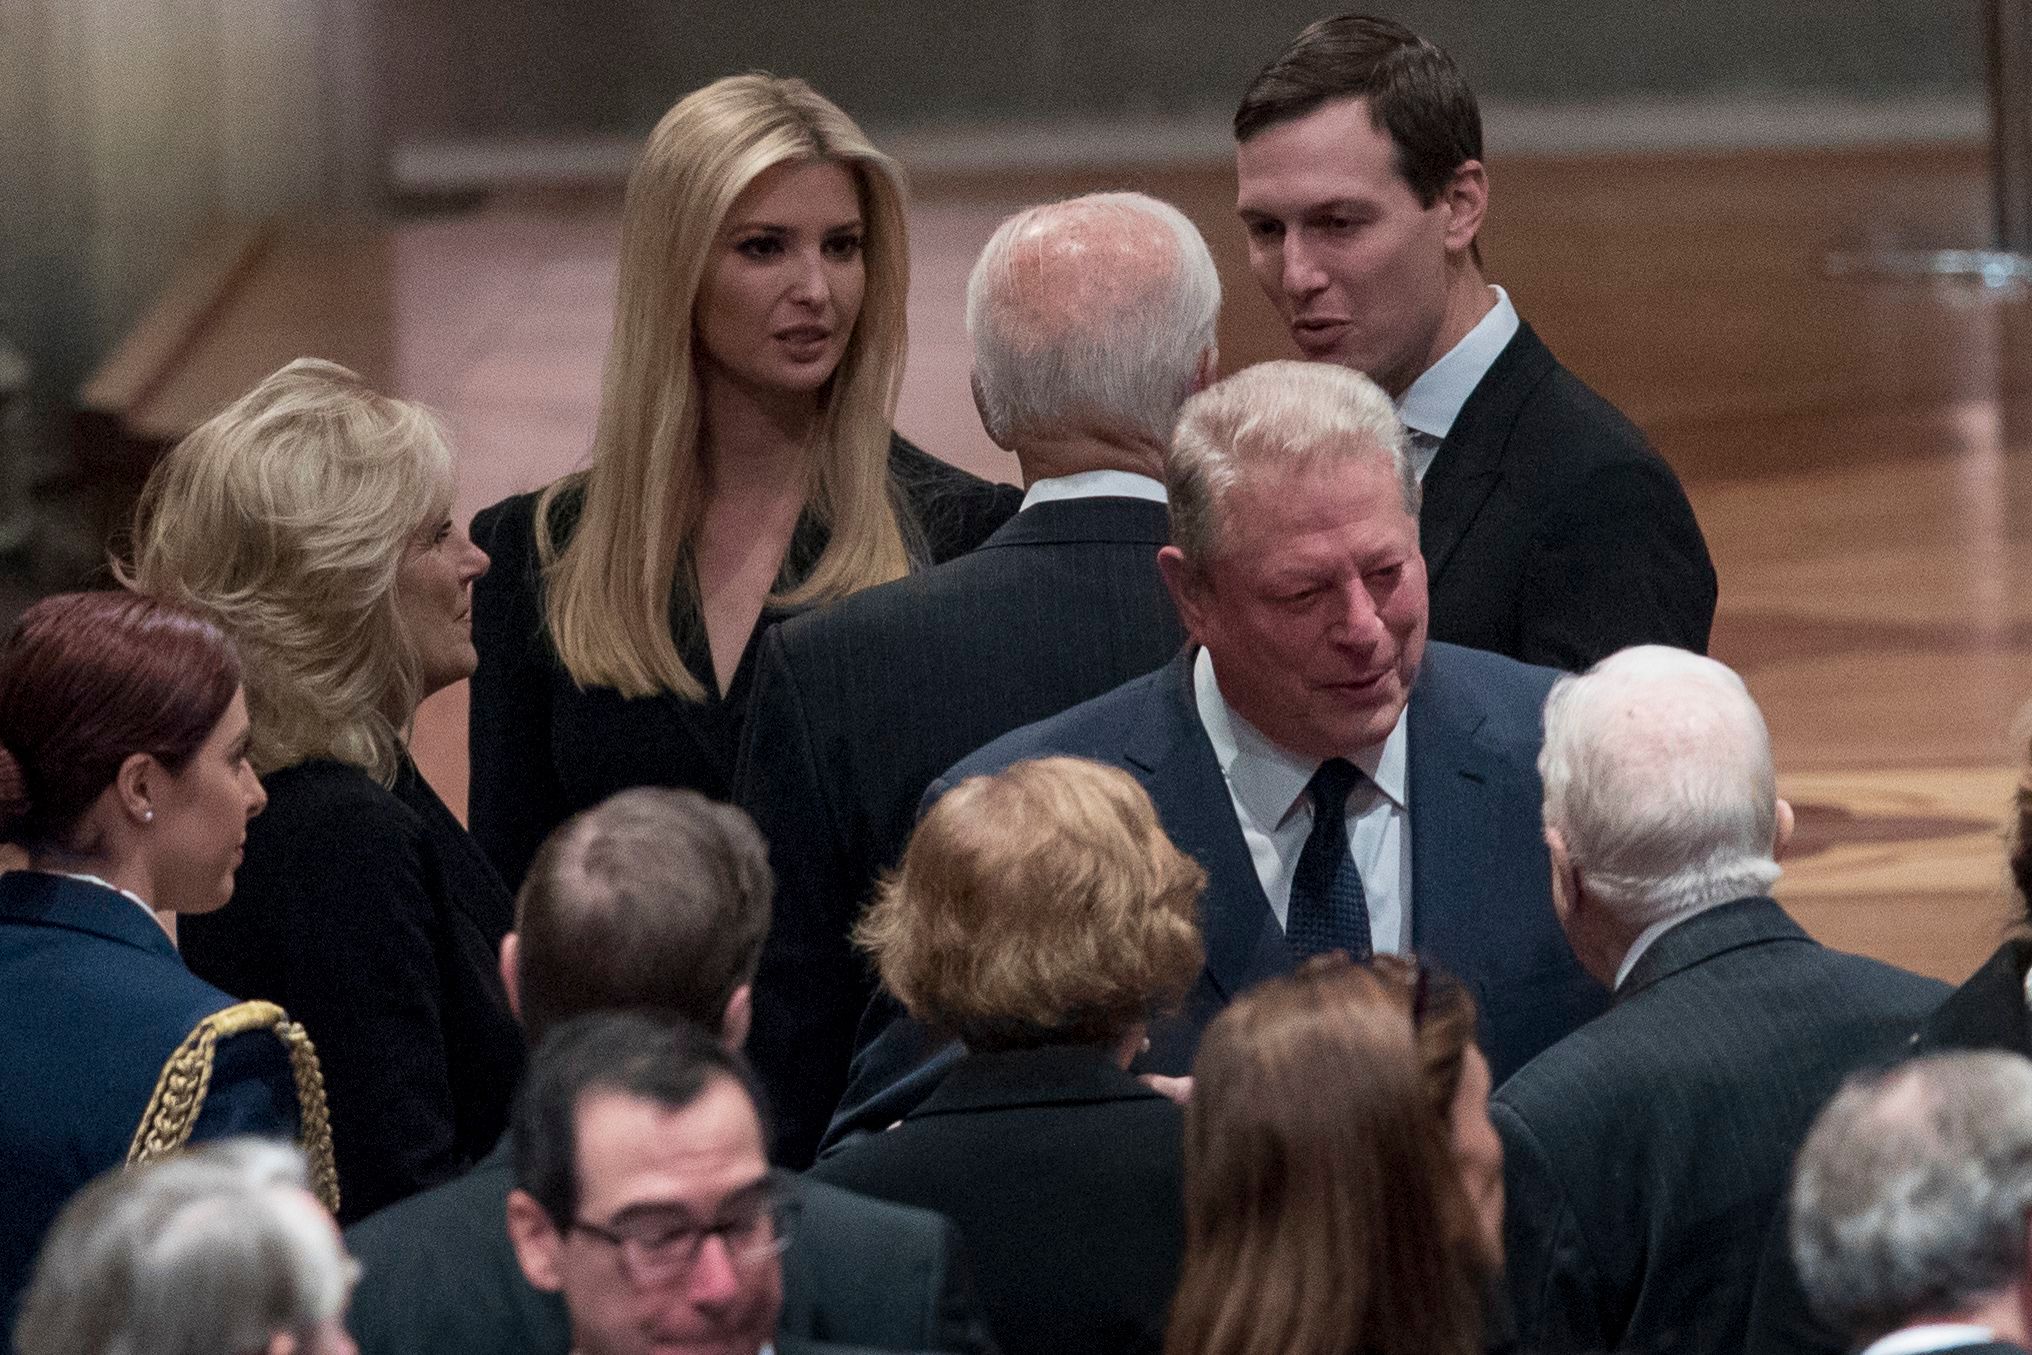 Former Vice President Joe Biden, and his wife Jill Biden, speak with Ivanka Trump, the daughter of President Donald Trump, and her husband, President Donald Trump's White House Senior Adviser Jared Kushner, as former Vice President Al Gore, speak to former President Jimmy Carter, and former first lady Rosalynn Carter, before a State Funeral for former President George H.W. Bush at the National Cathedral